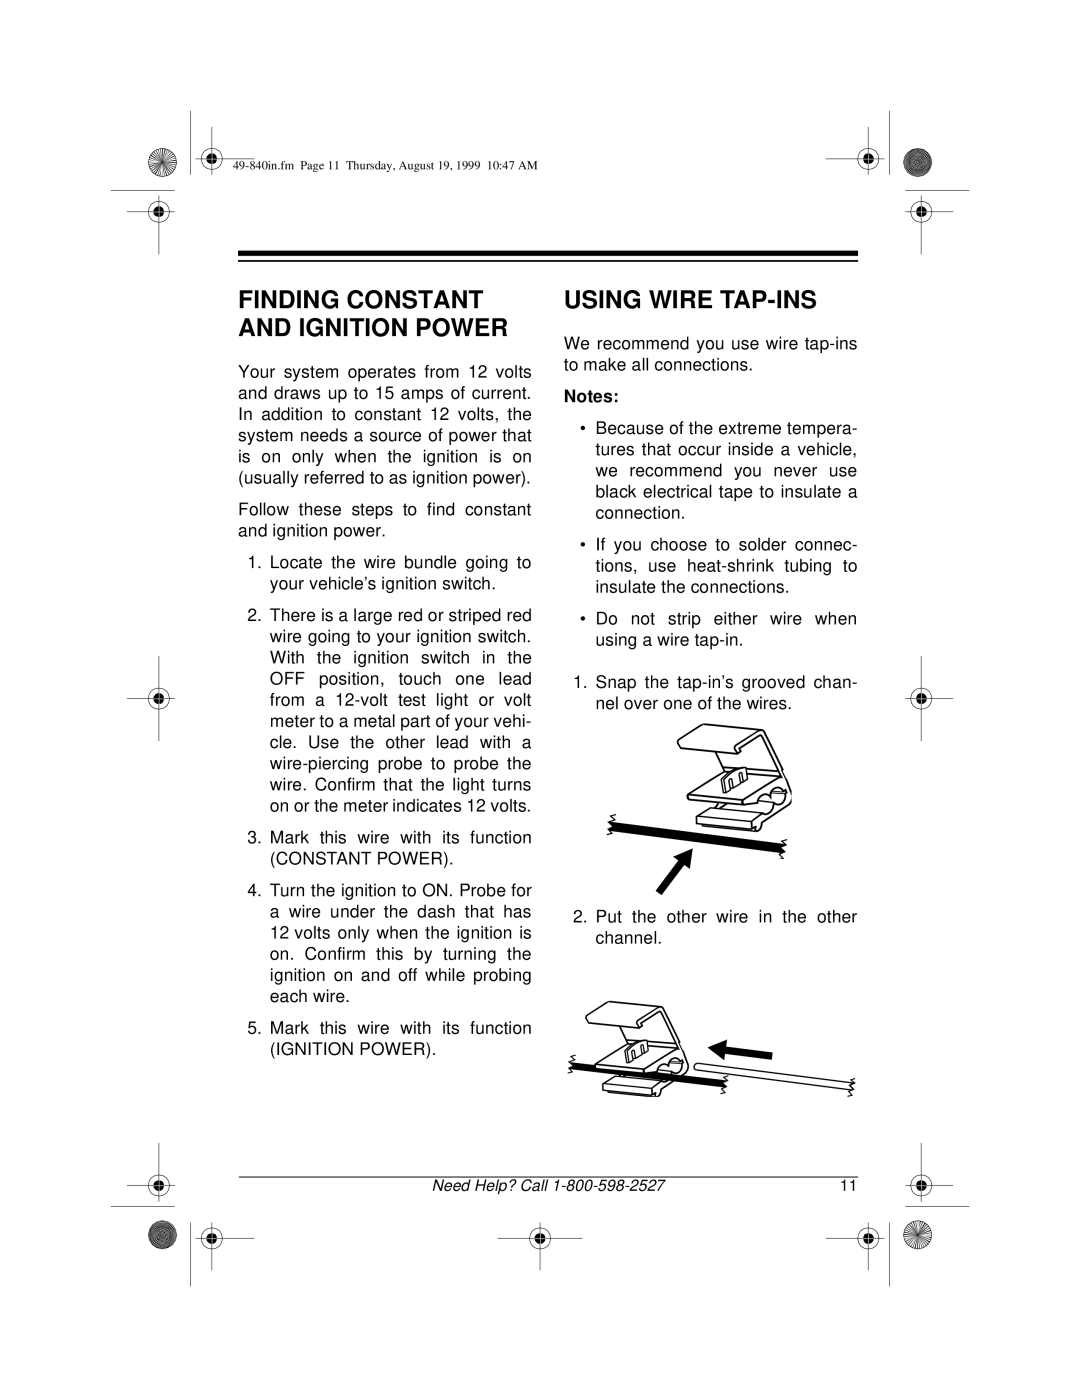 Radio Shack RS-4000 installation manual Finding Constant And Ignition Power, Using Wire Tap-Ins 